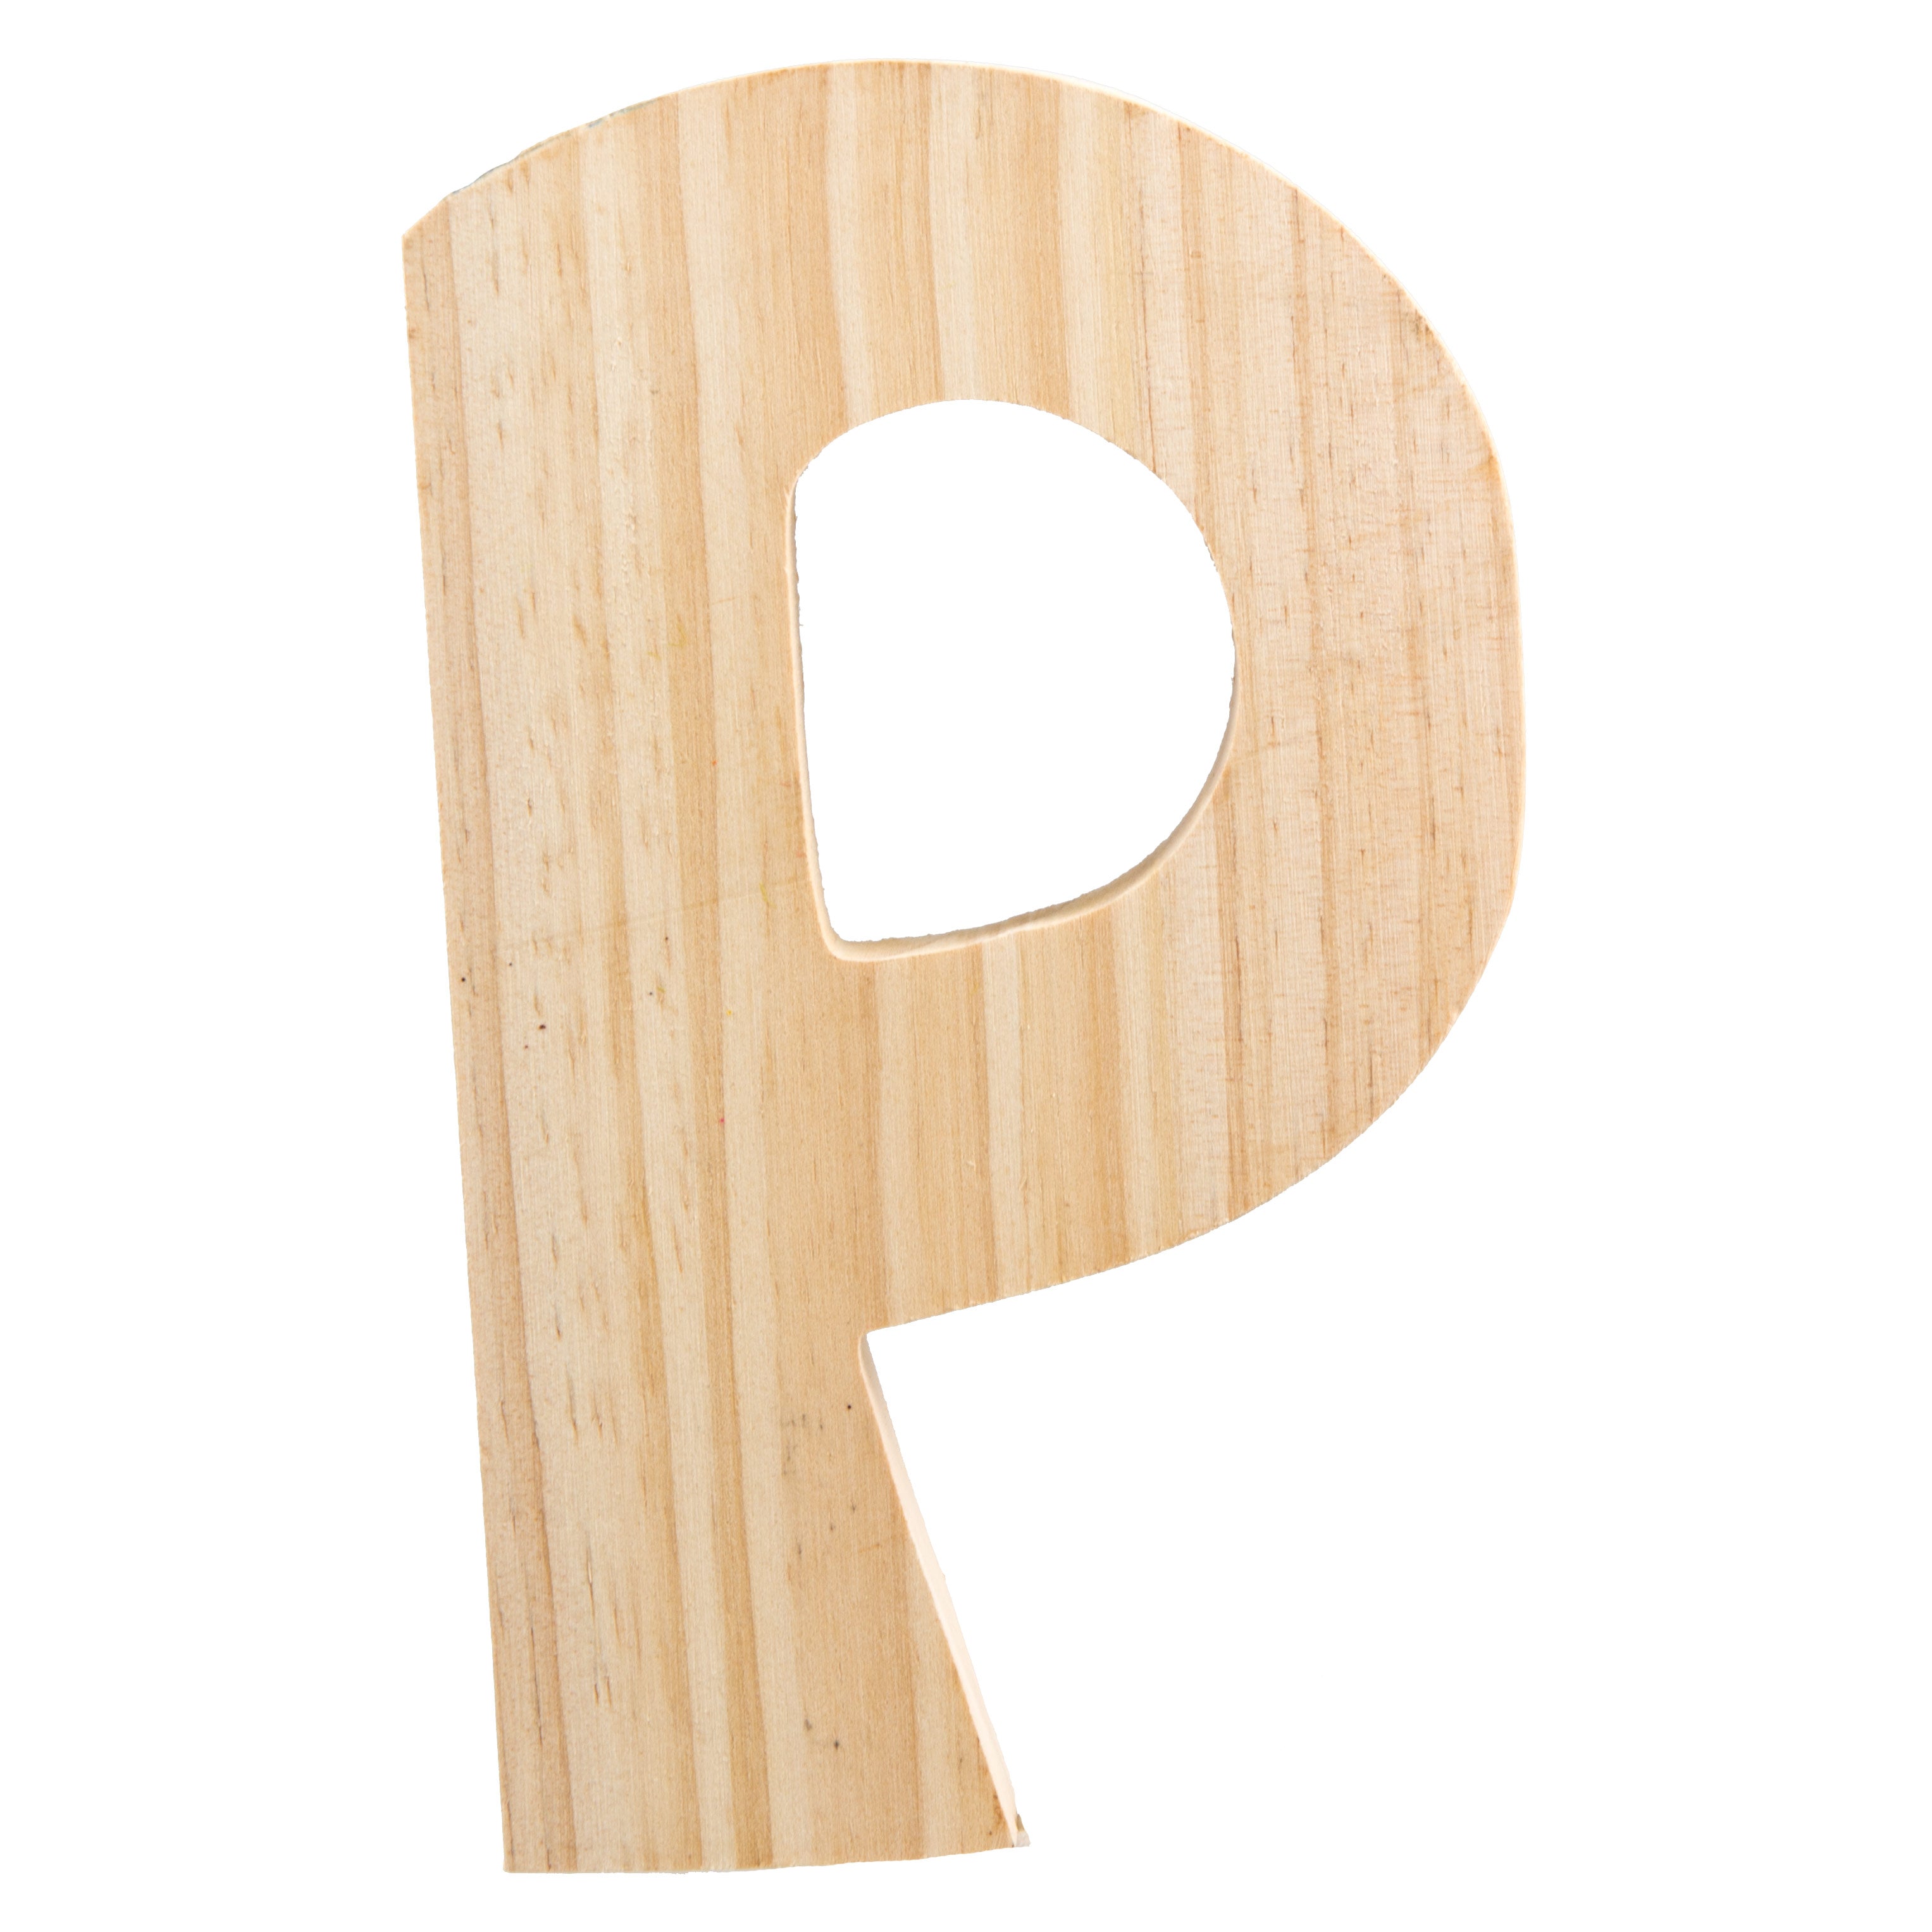 7.75" Chunky Wooden Letter: P